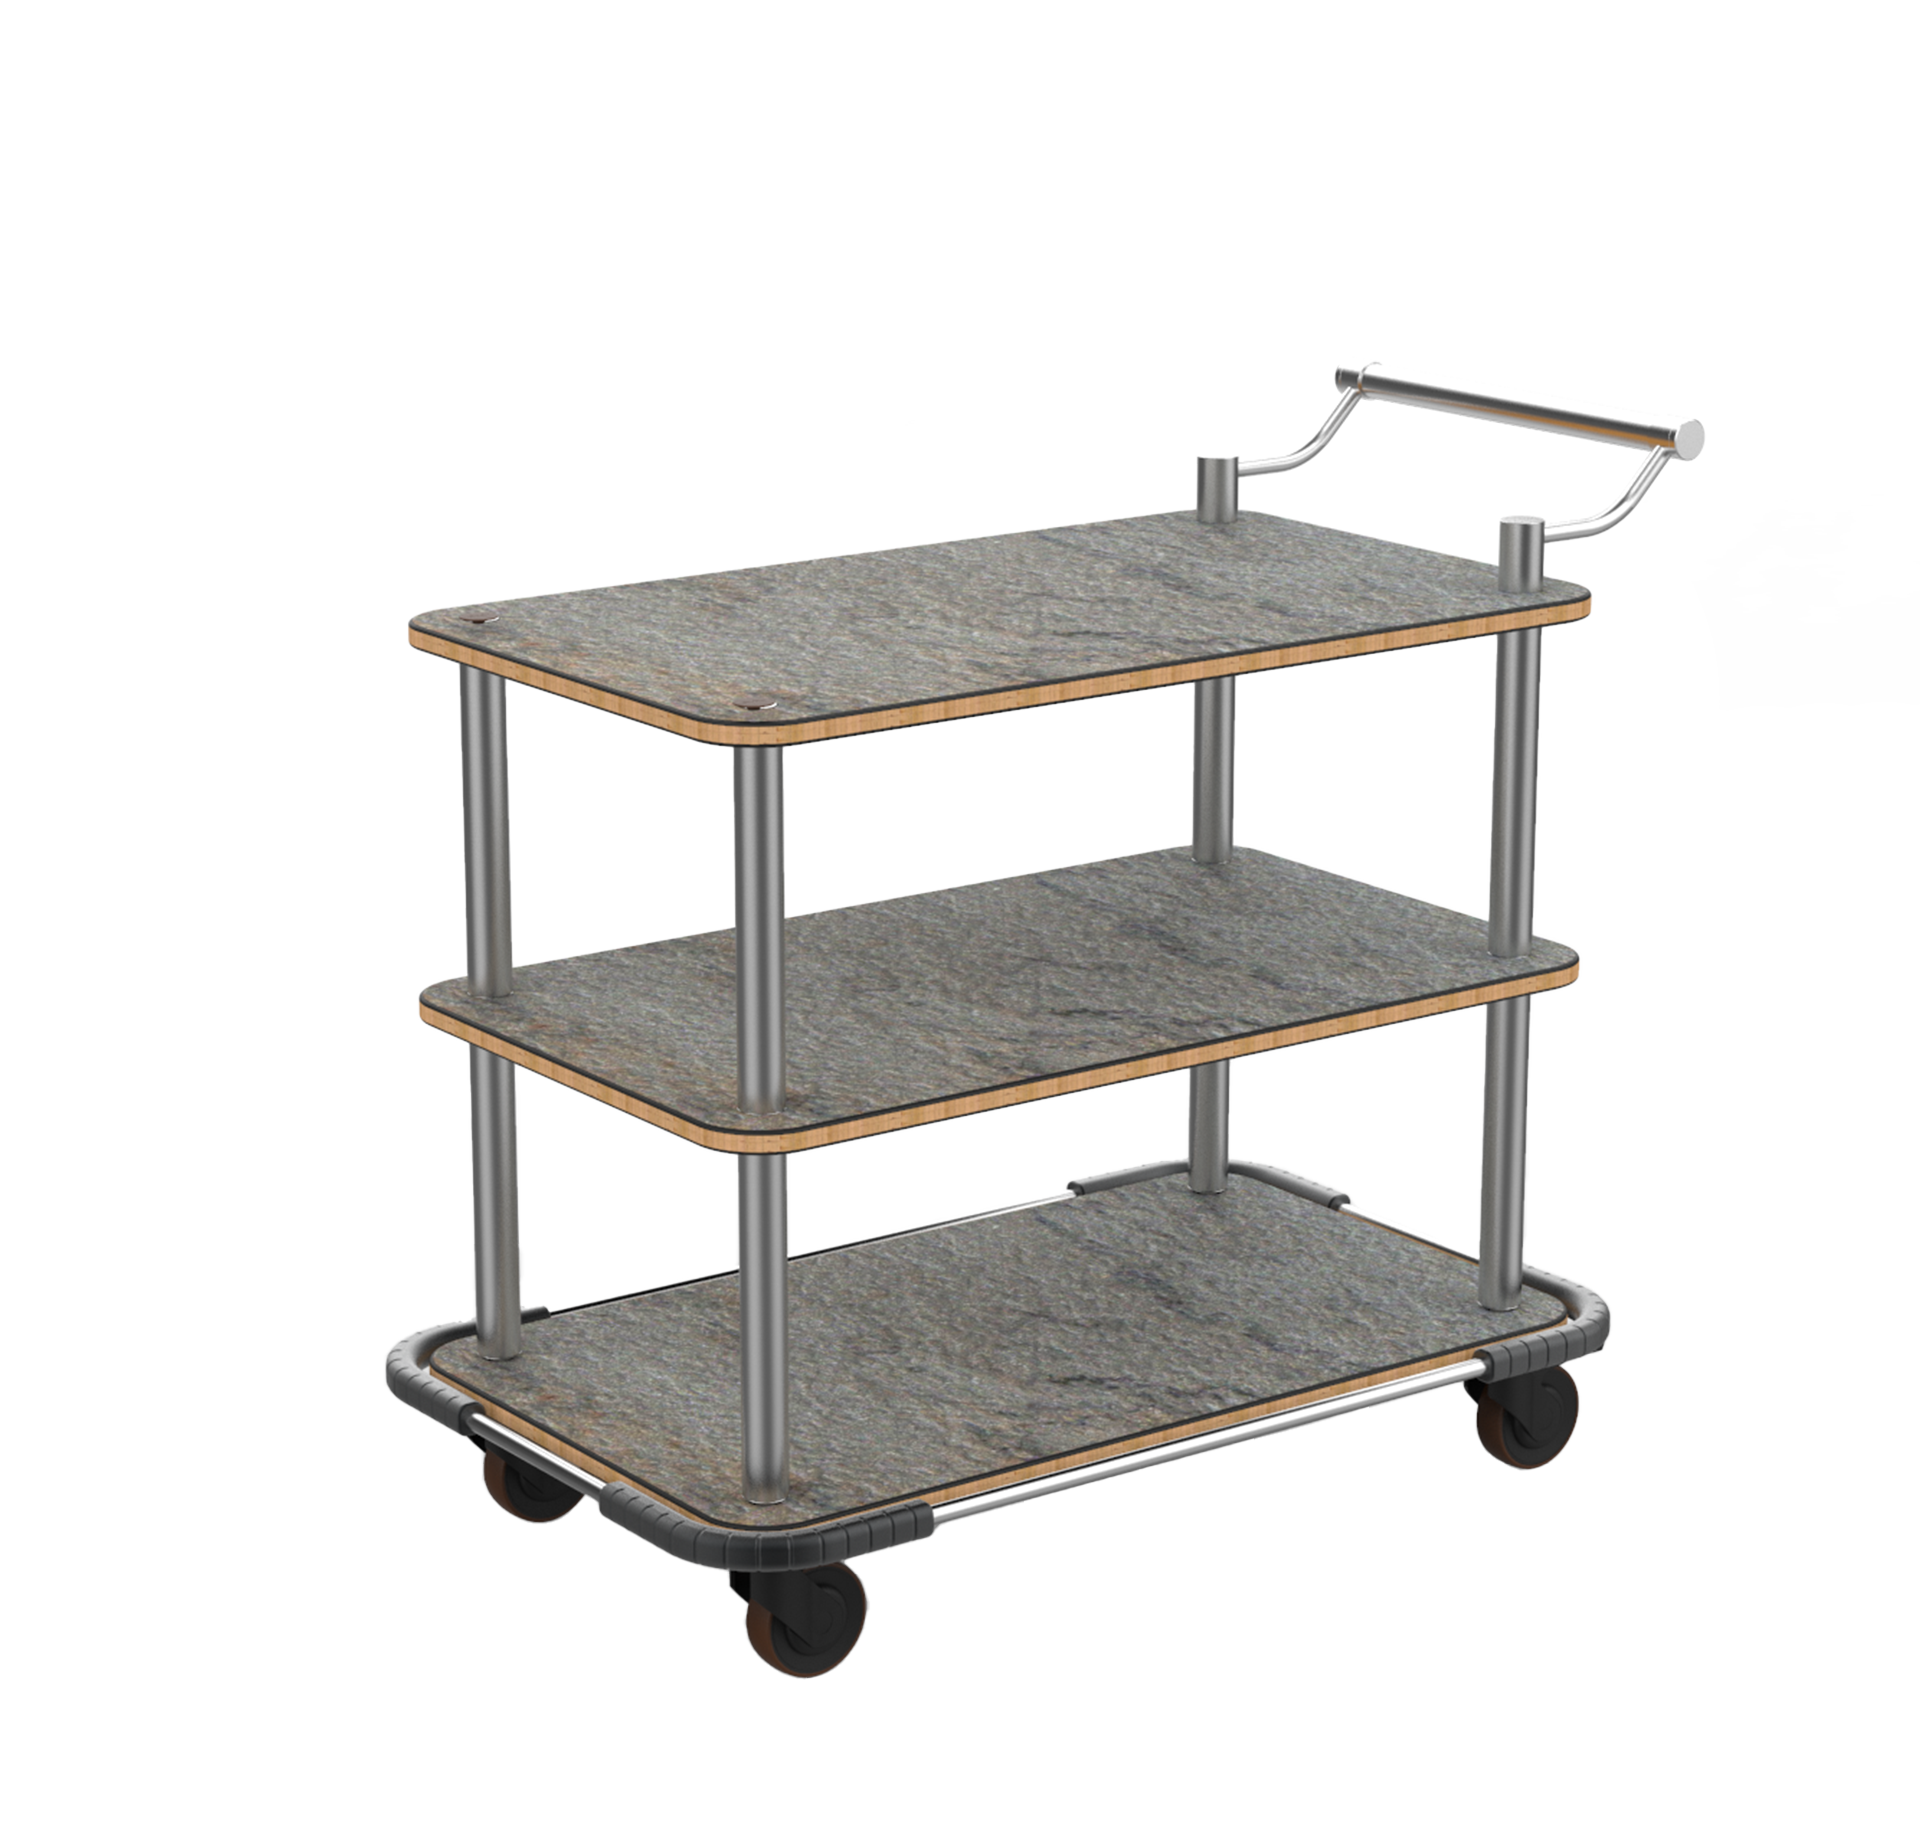 SERVICE CART WITH STAINLESS STEEL HANDLE AND HEAVY DUTY BUMPER